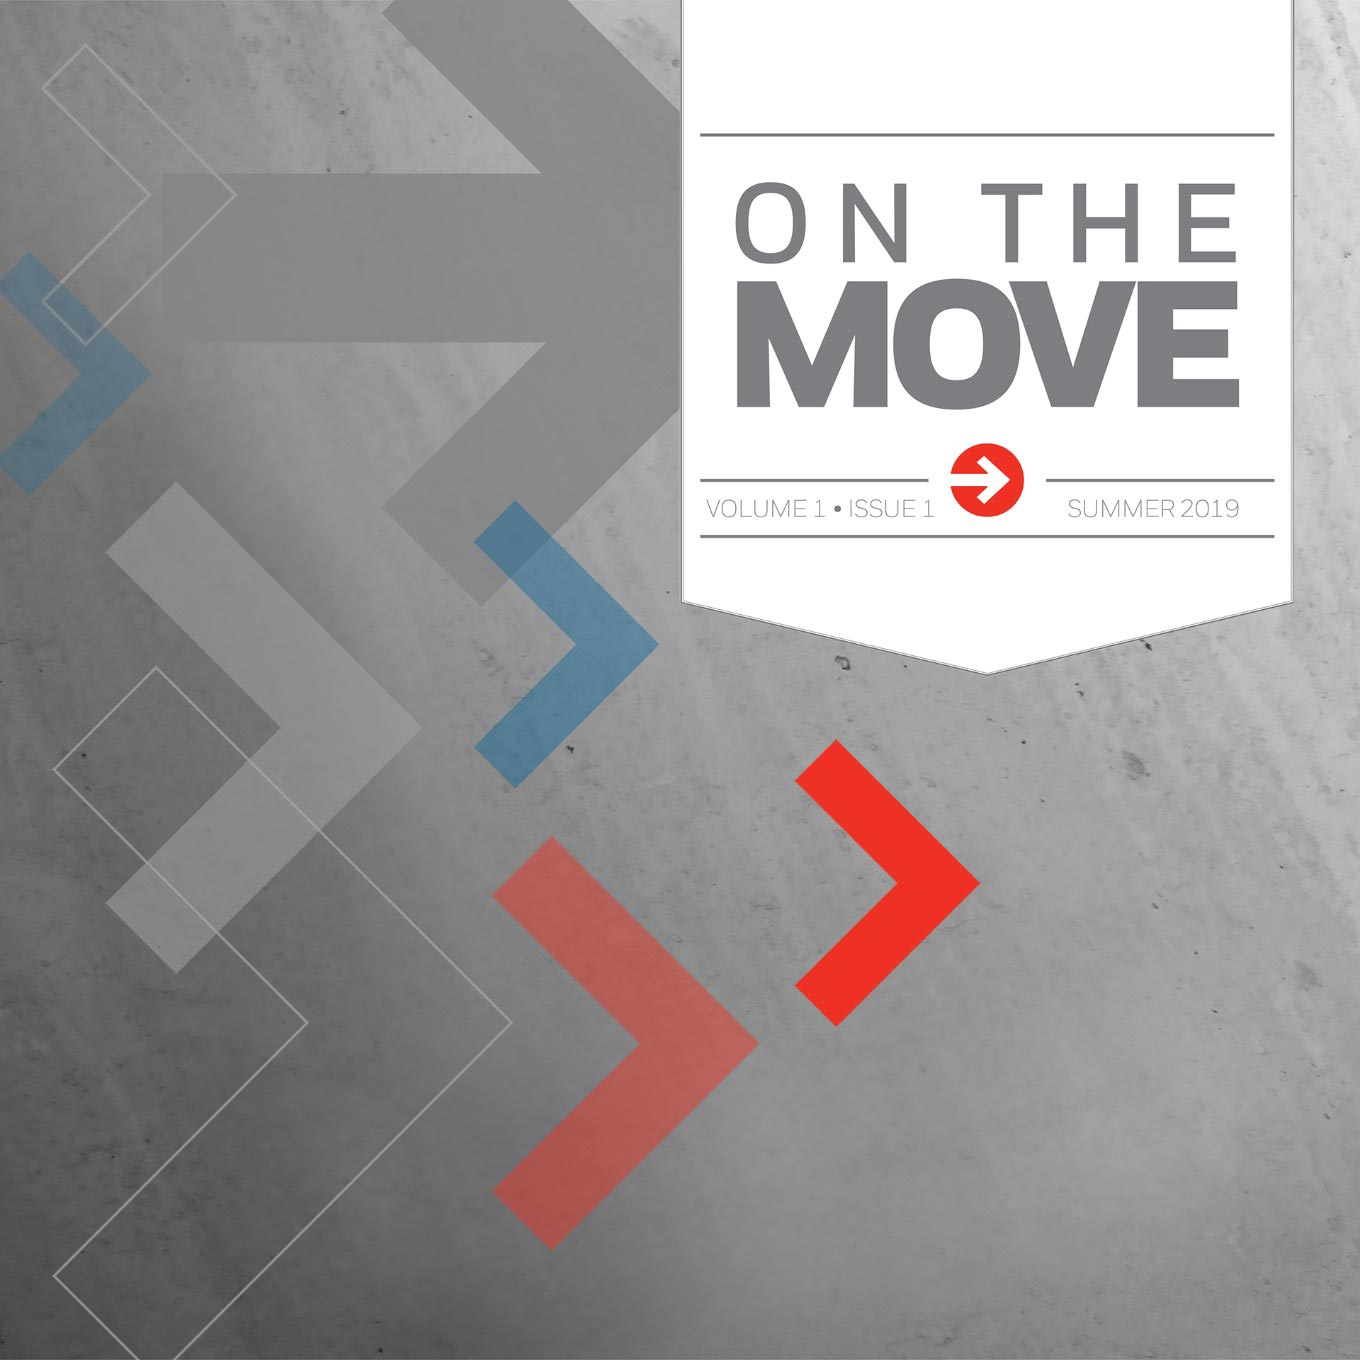 On the Move magazine cover